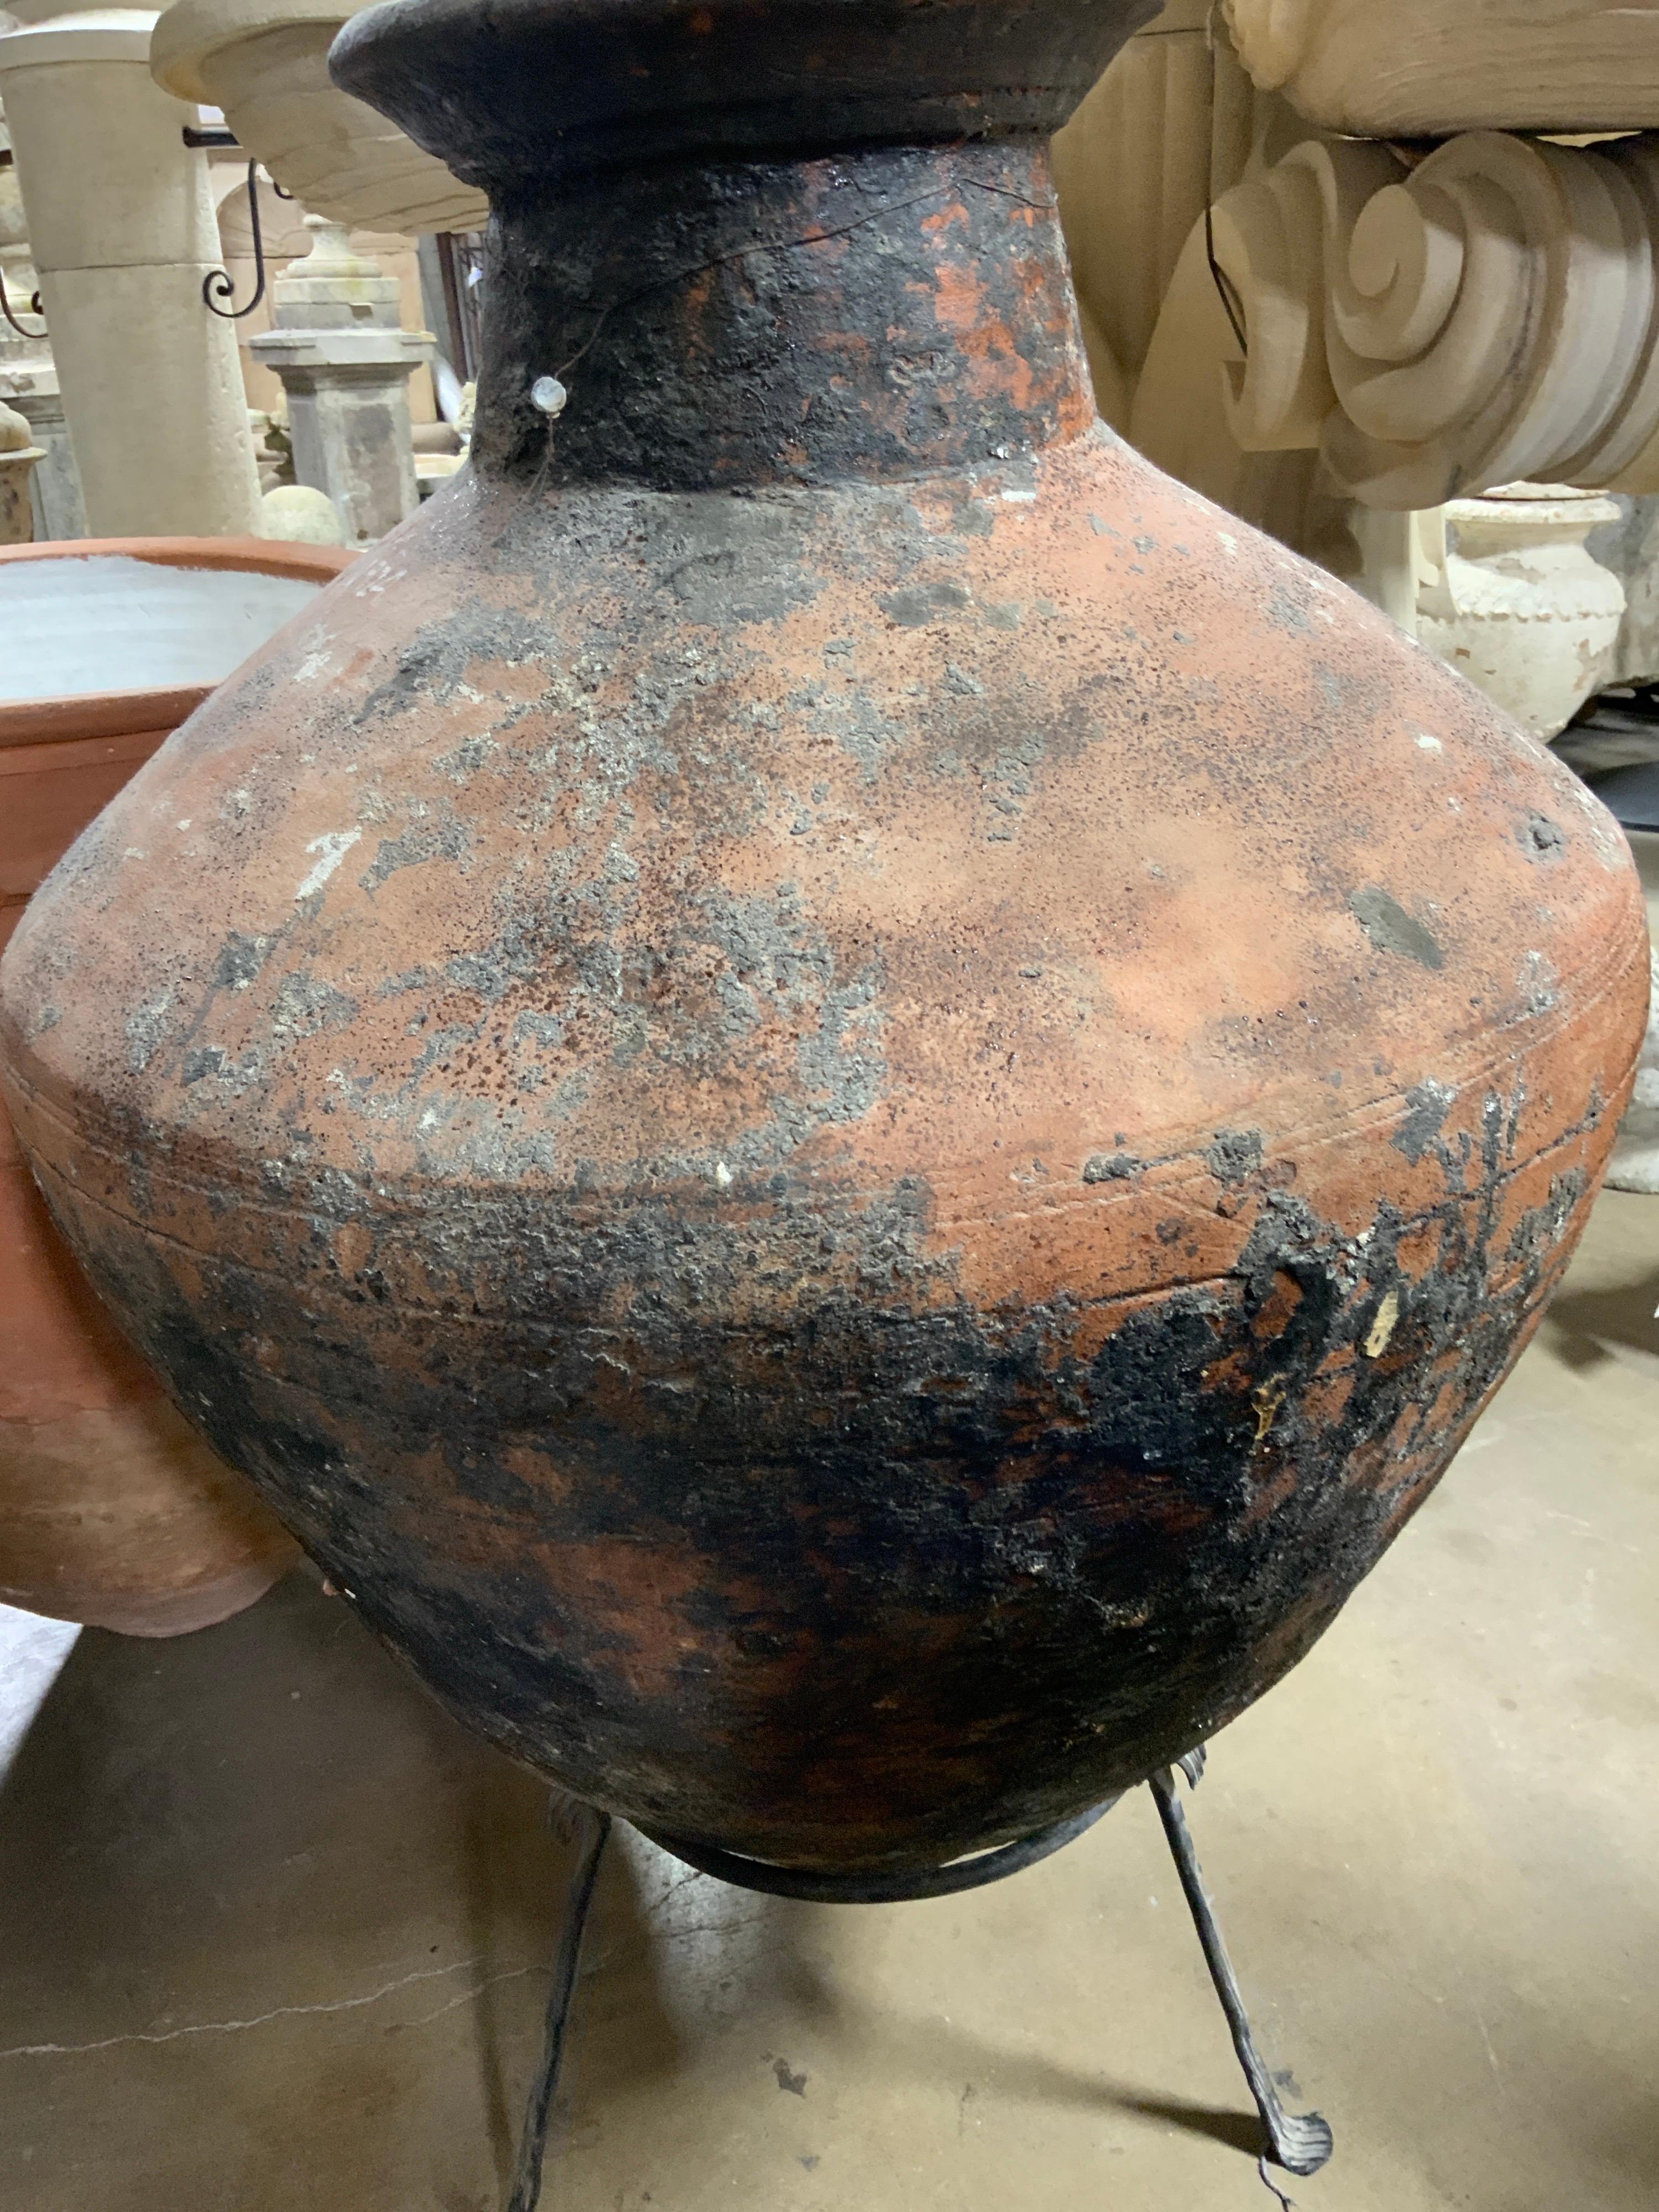 Beautiful vessel dates back to the 1850s. Item originates from Greece.